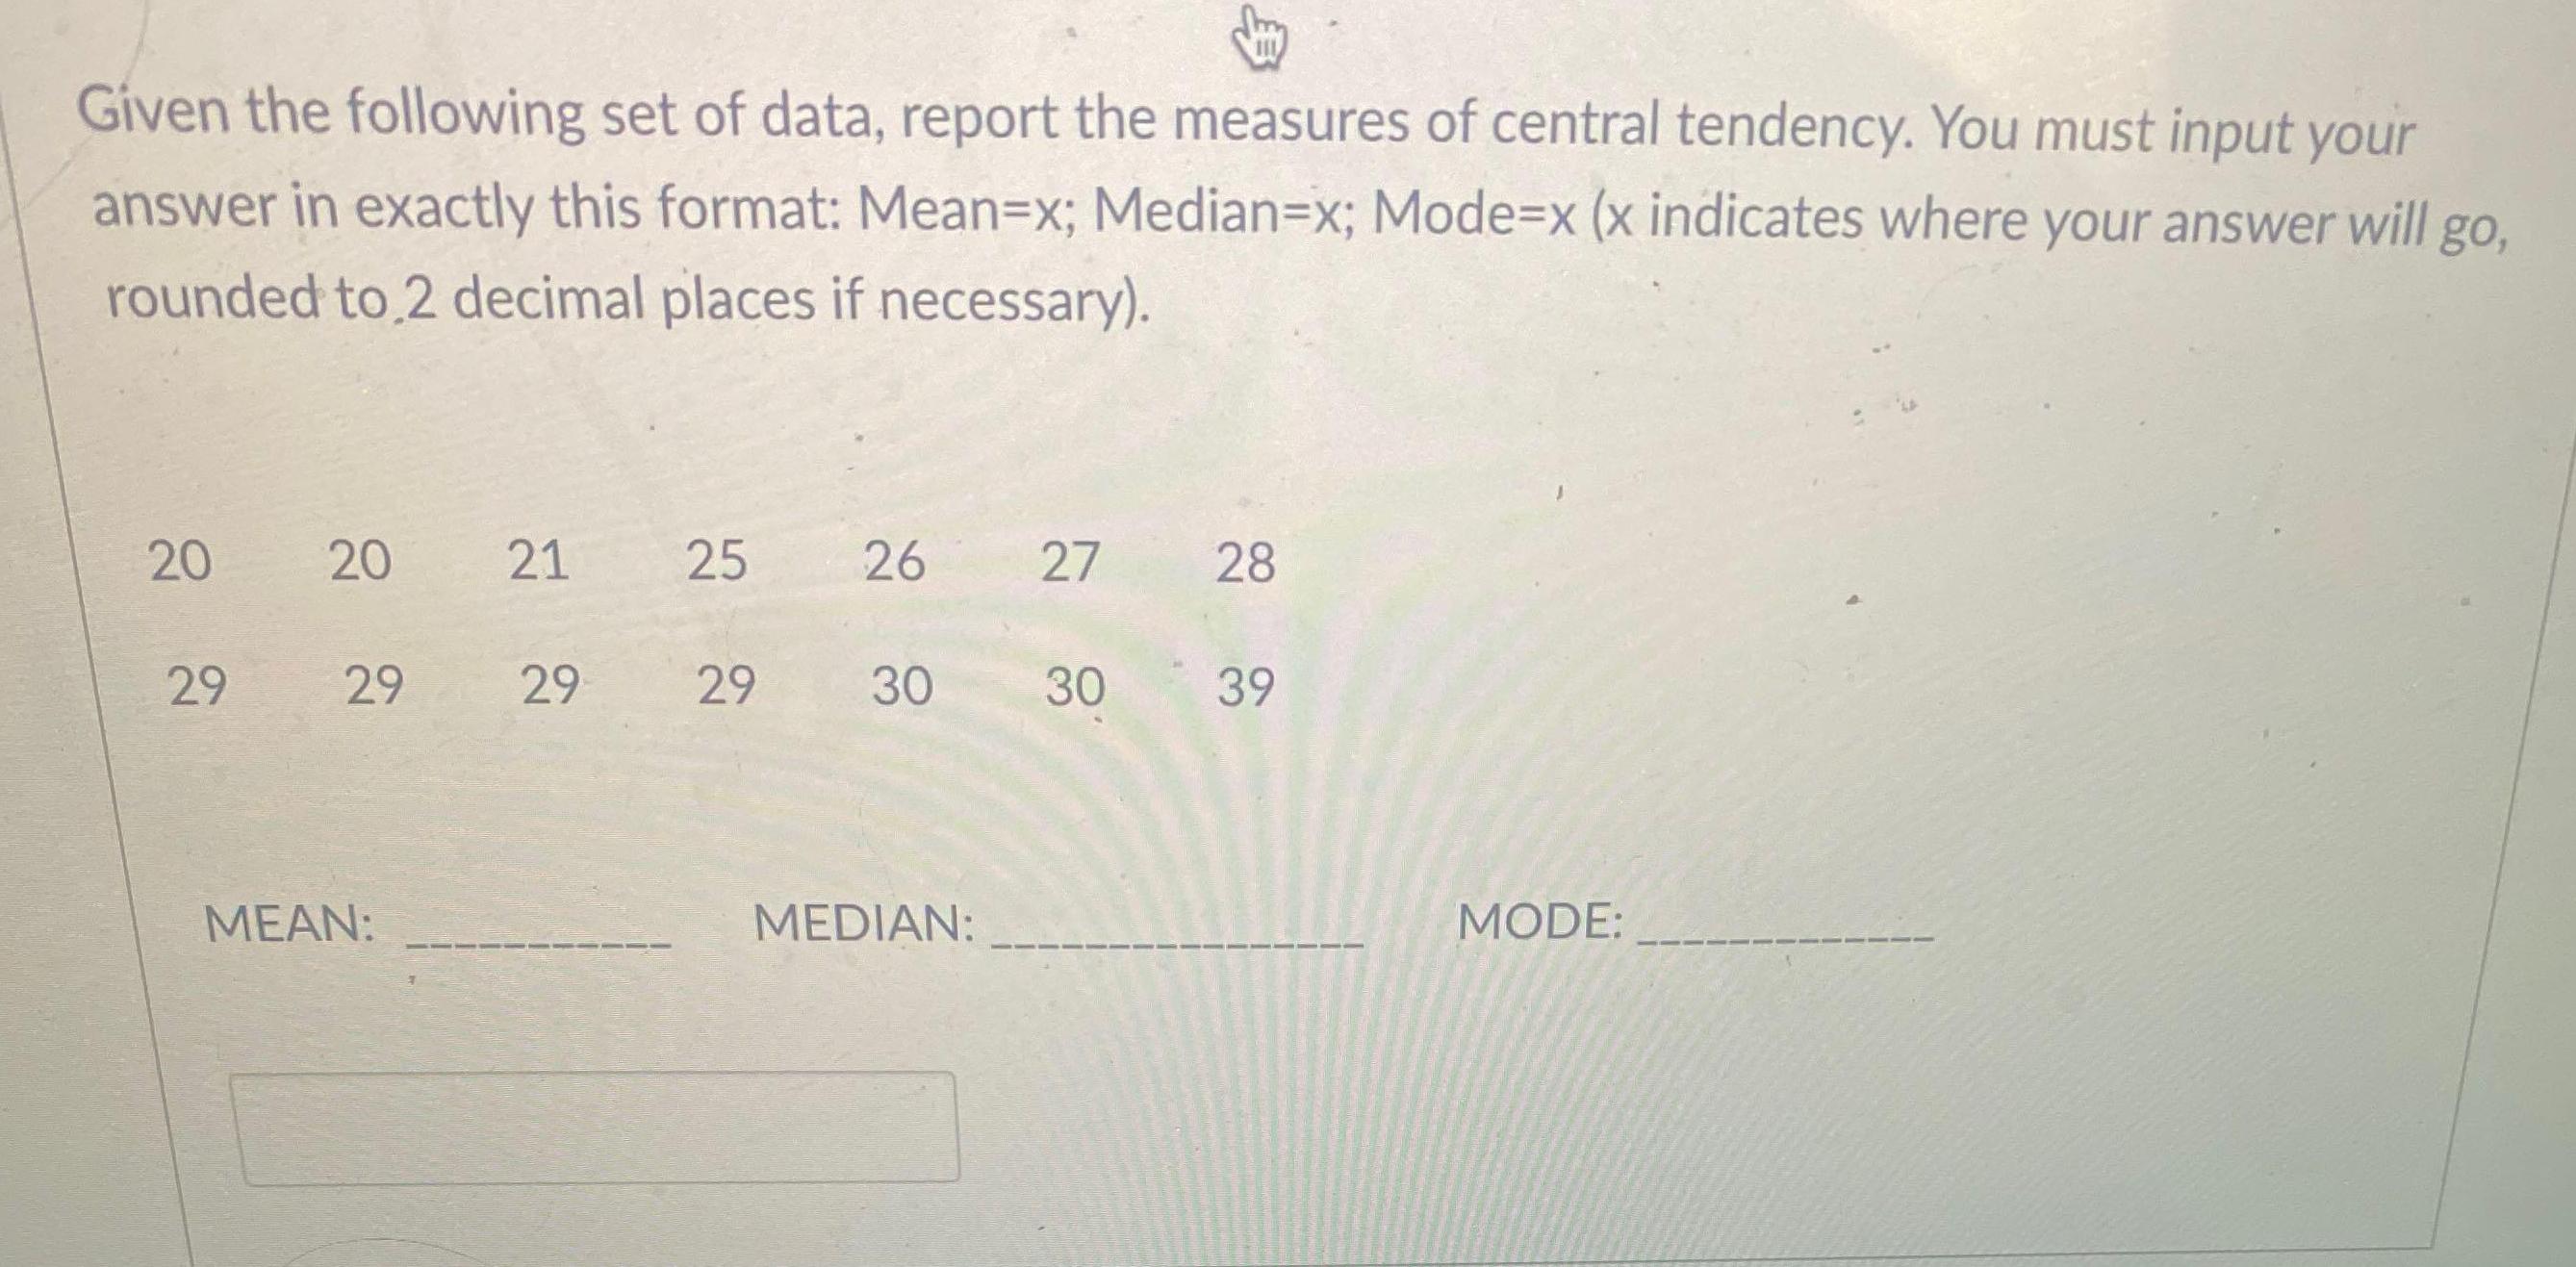 Given the following set of data, report the measures of central tendency. You must input your answer in